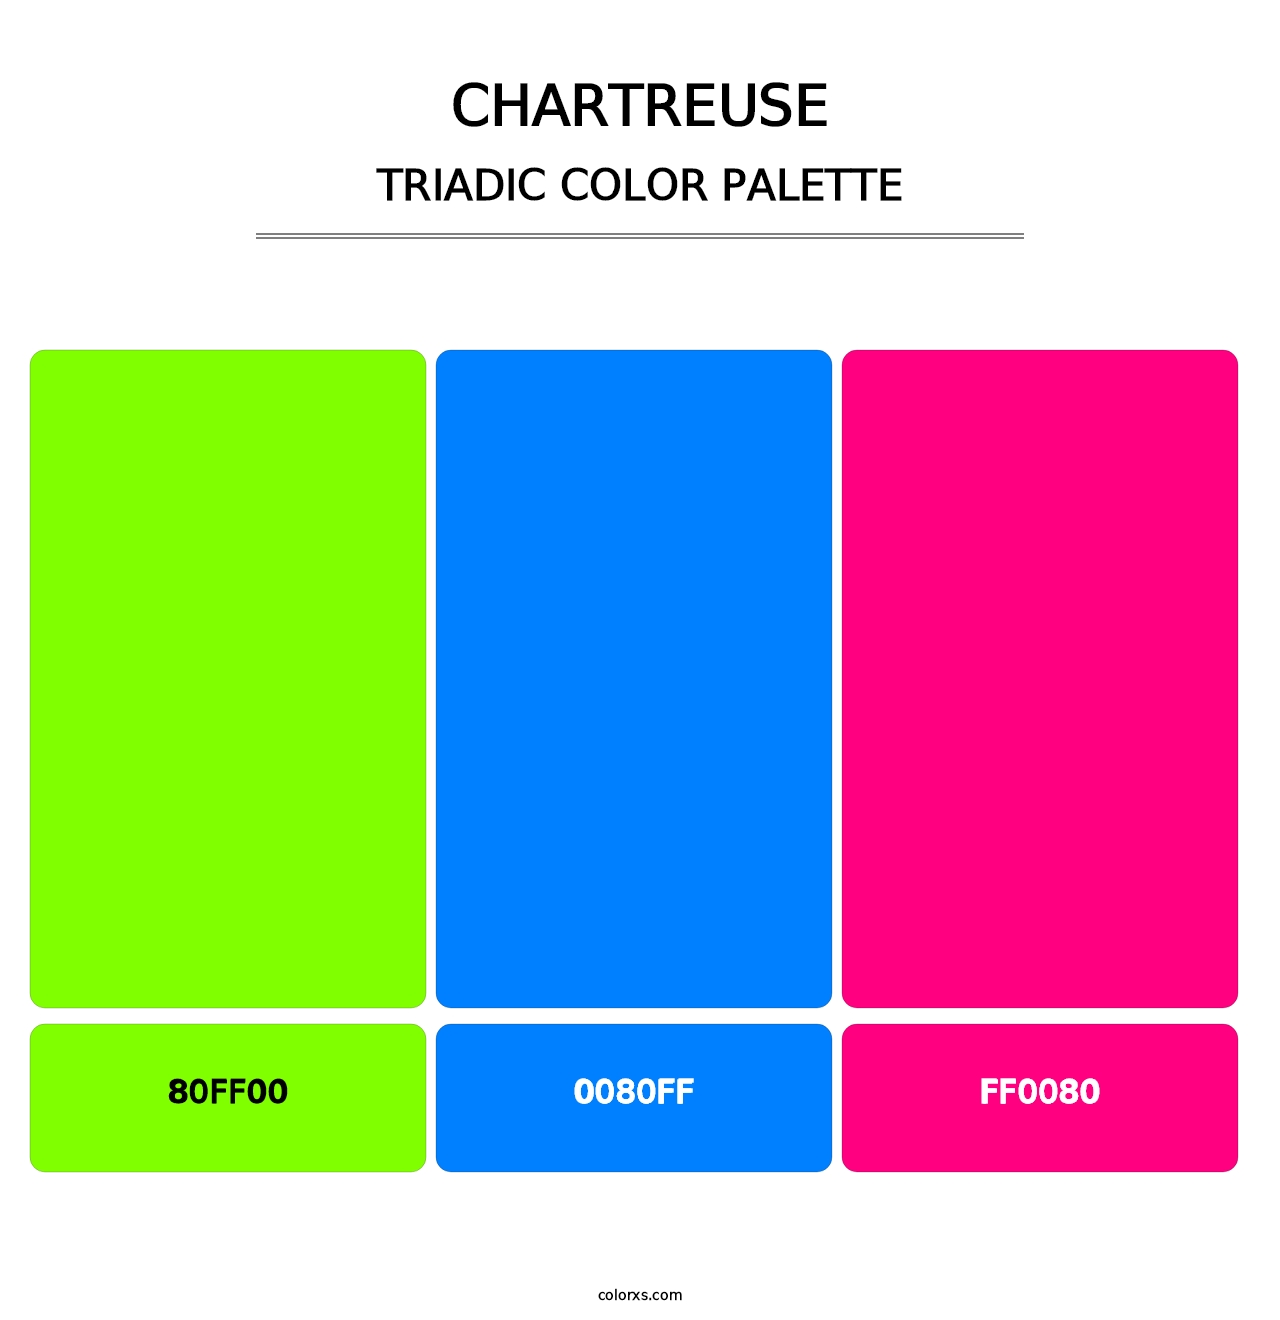 Chartreuse - Triadic Color Palette